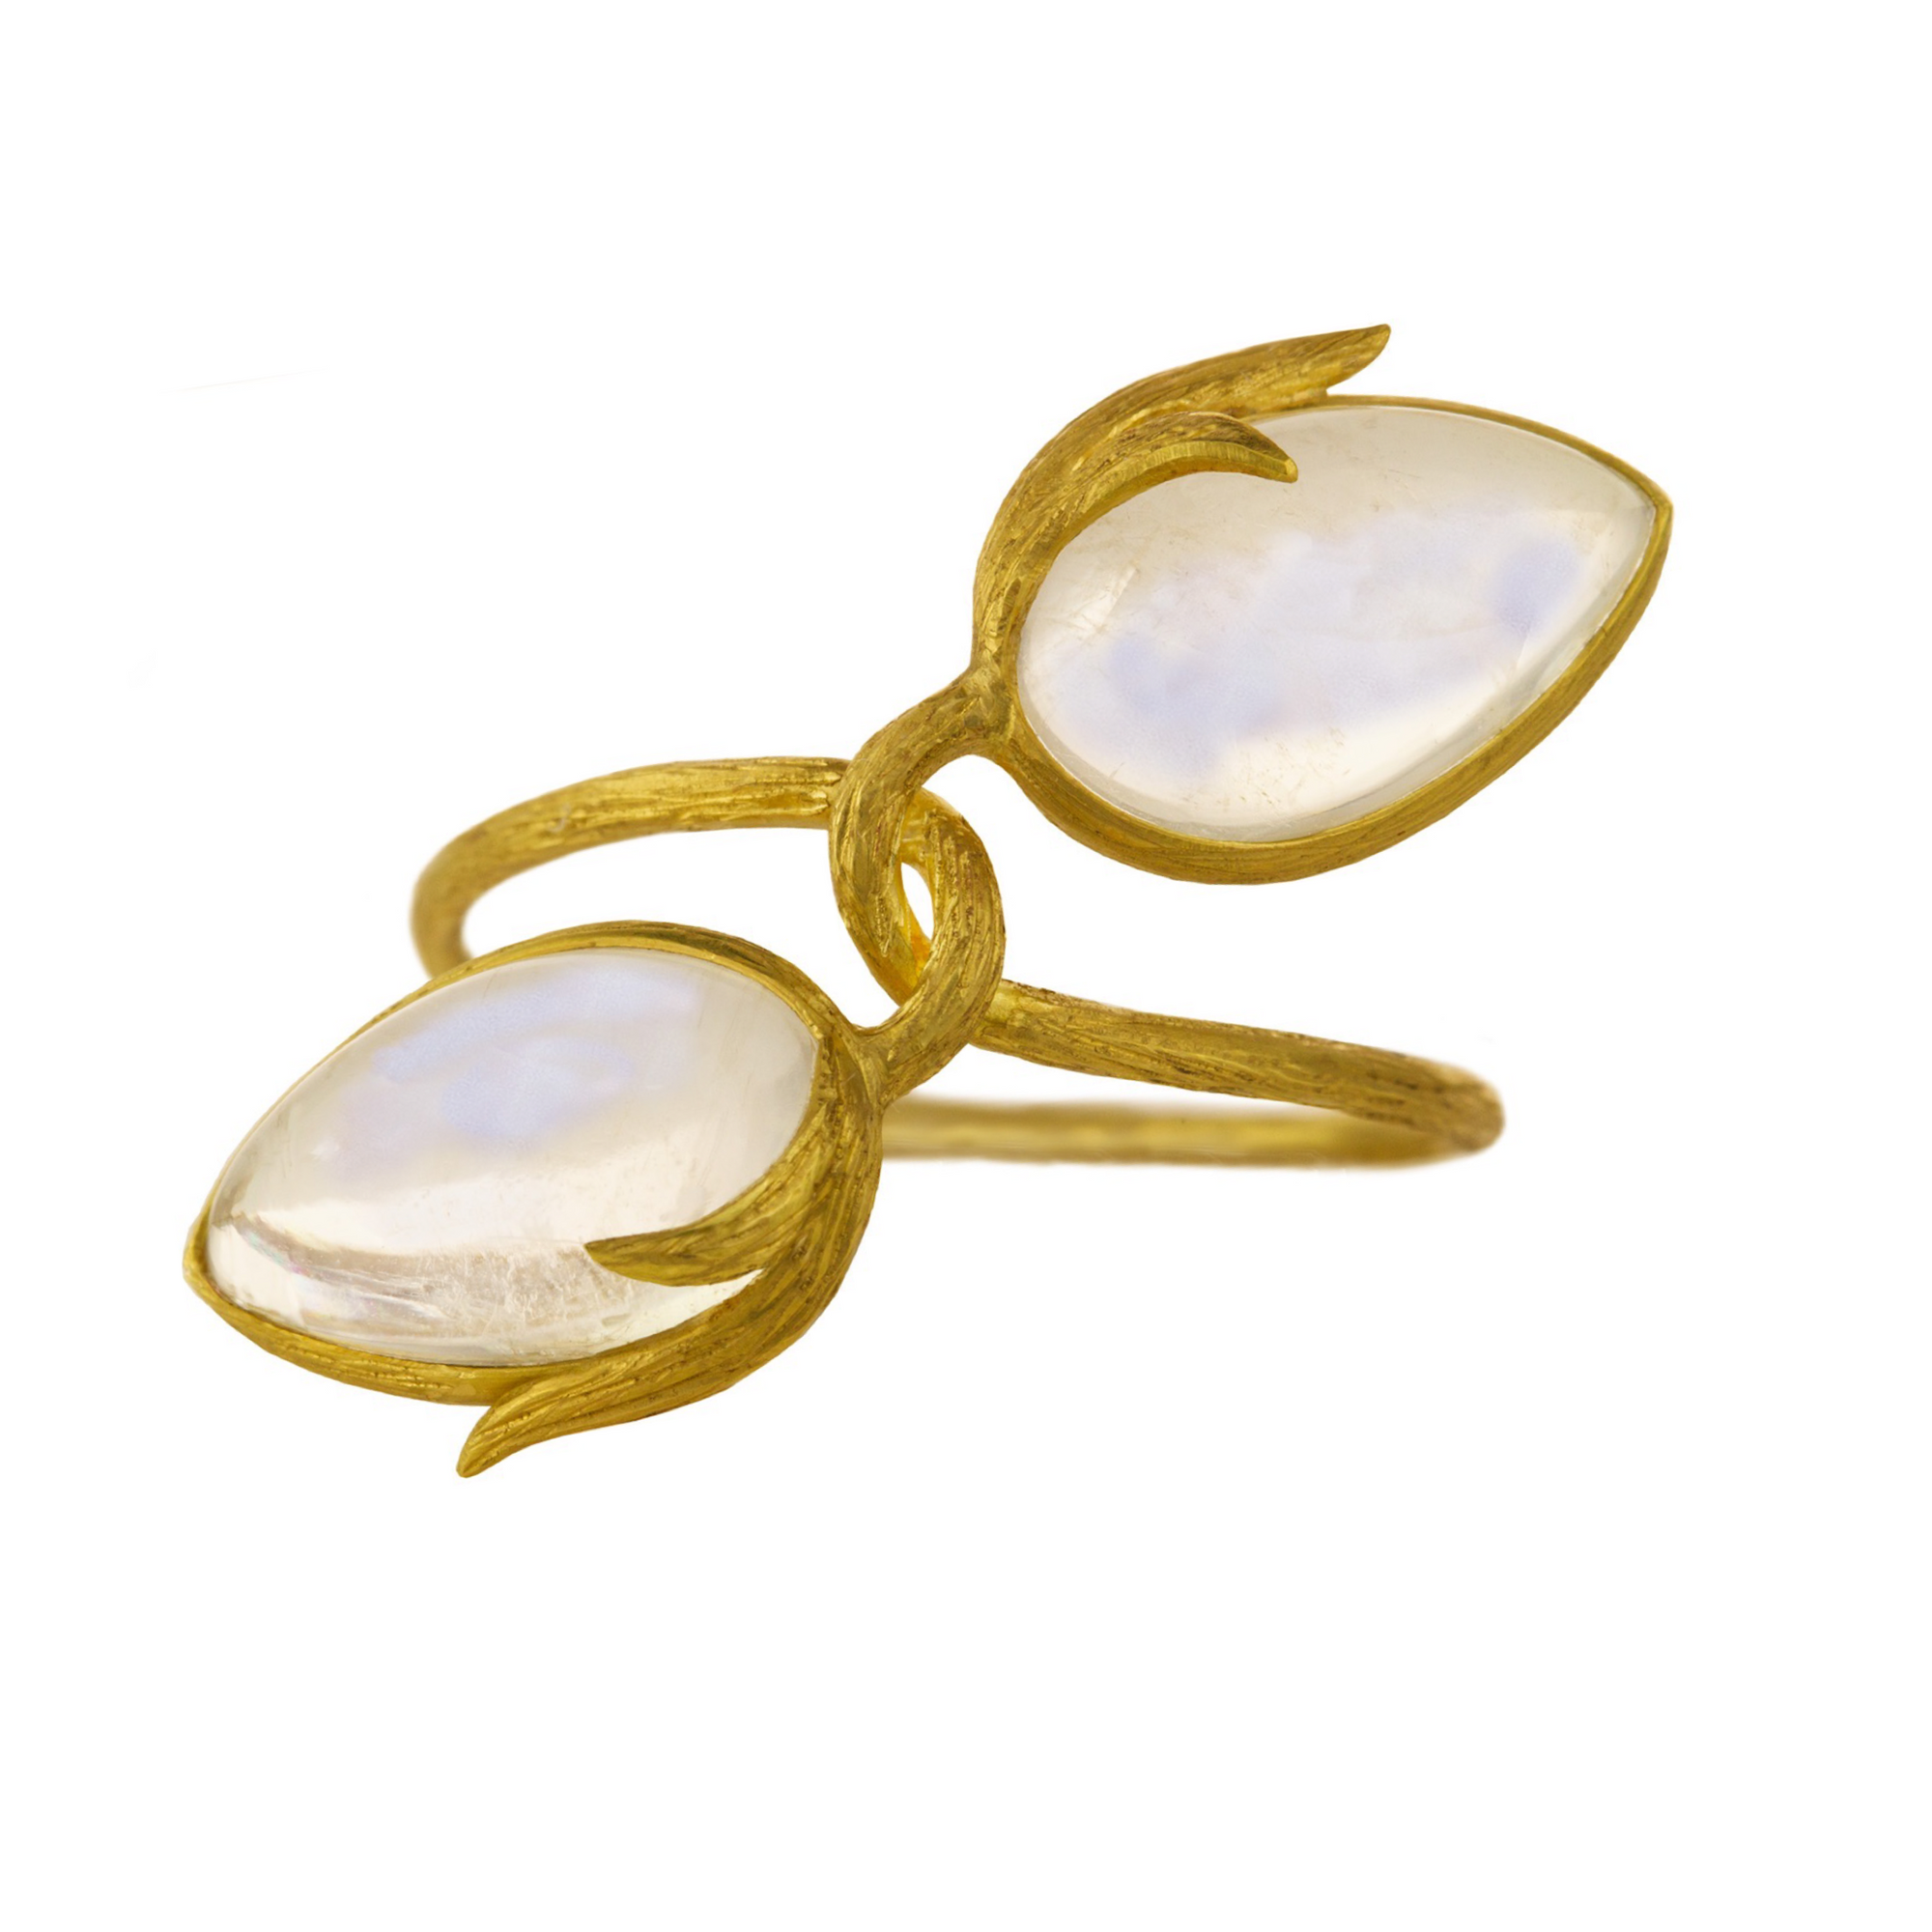 Moonstone Looped Vine Ring by Laurie Kaiser available at Talisman Collection Fine Jewelers in El Dorado Hills, CA and online. Features two pear-cut cabochon rainbow moonstones set on an 18k yellow gold that resembles twisted vines. This ring effortlessly showcases the natural beauty and elegance of the gems, making it a truly remarkable piece. Its unique design make it a standout!